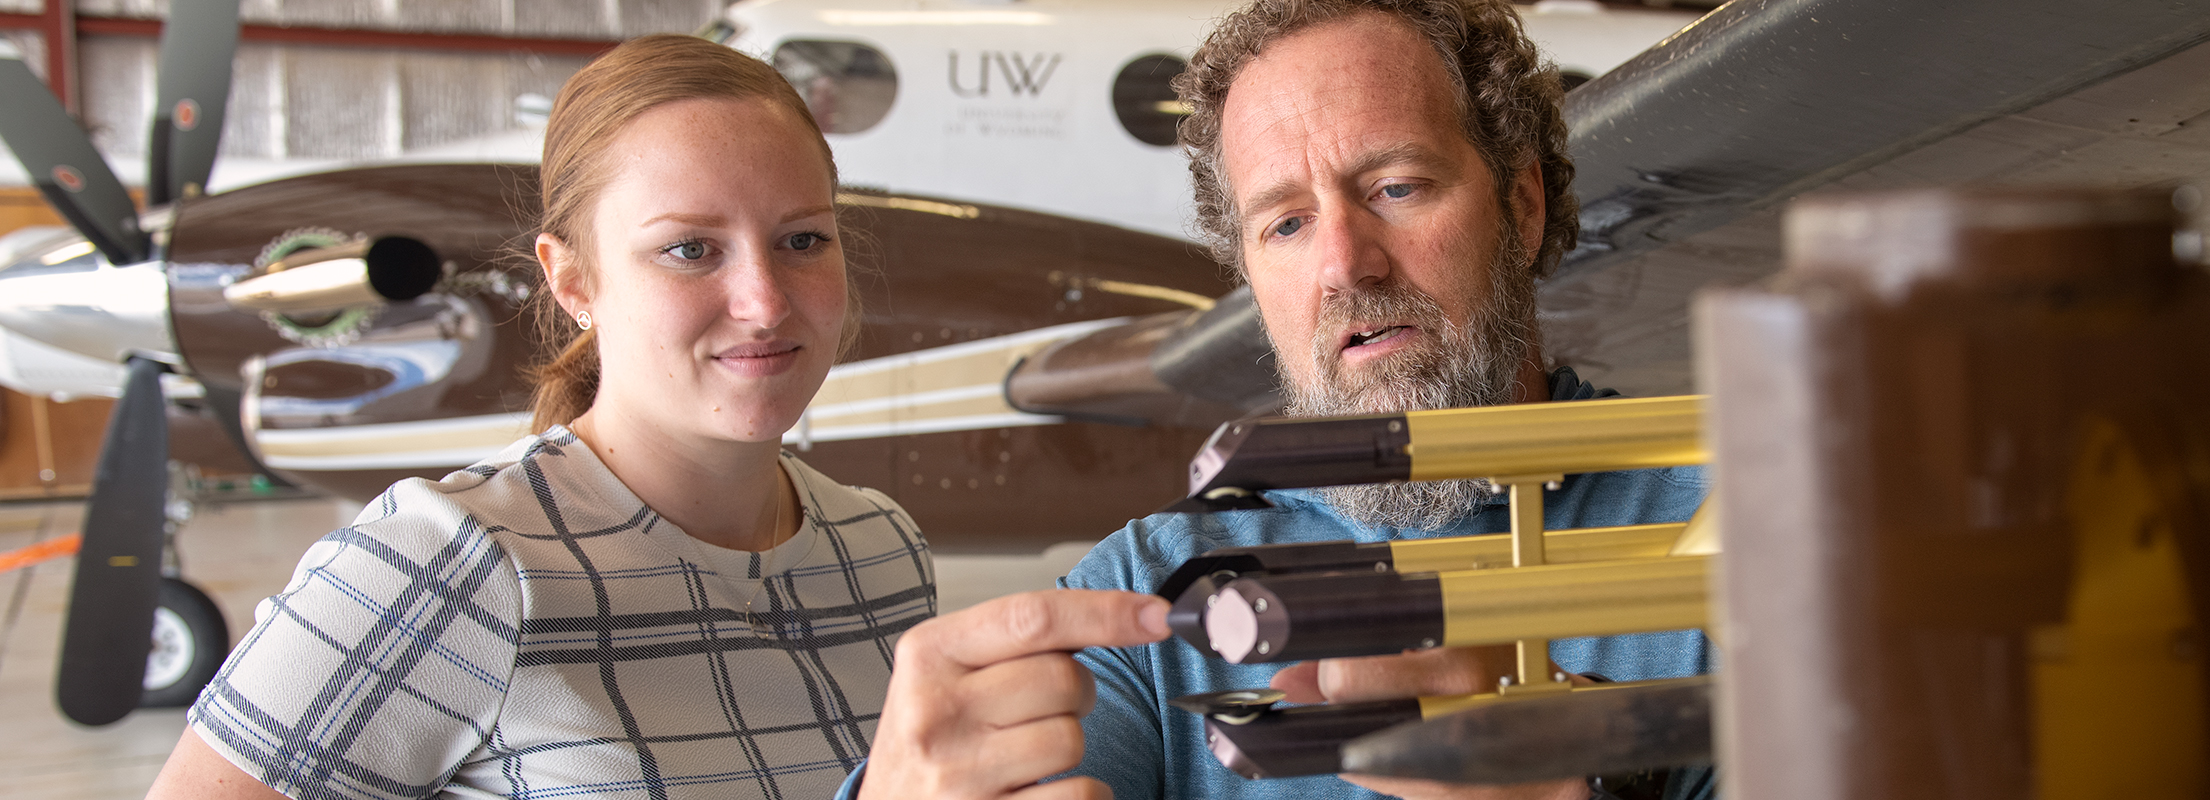 A faculty meber guides a student in instrument research at the UW-Flight Center